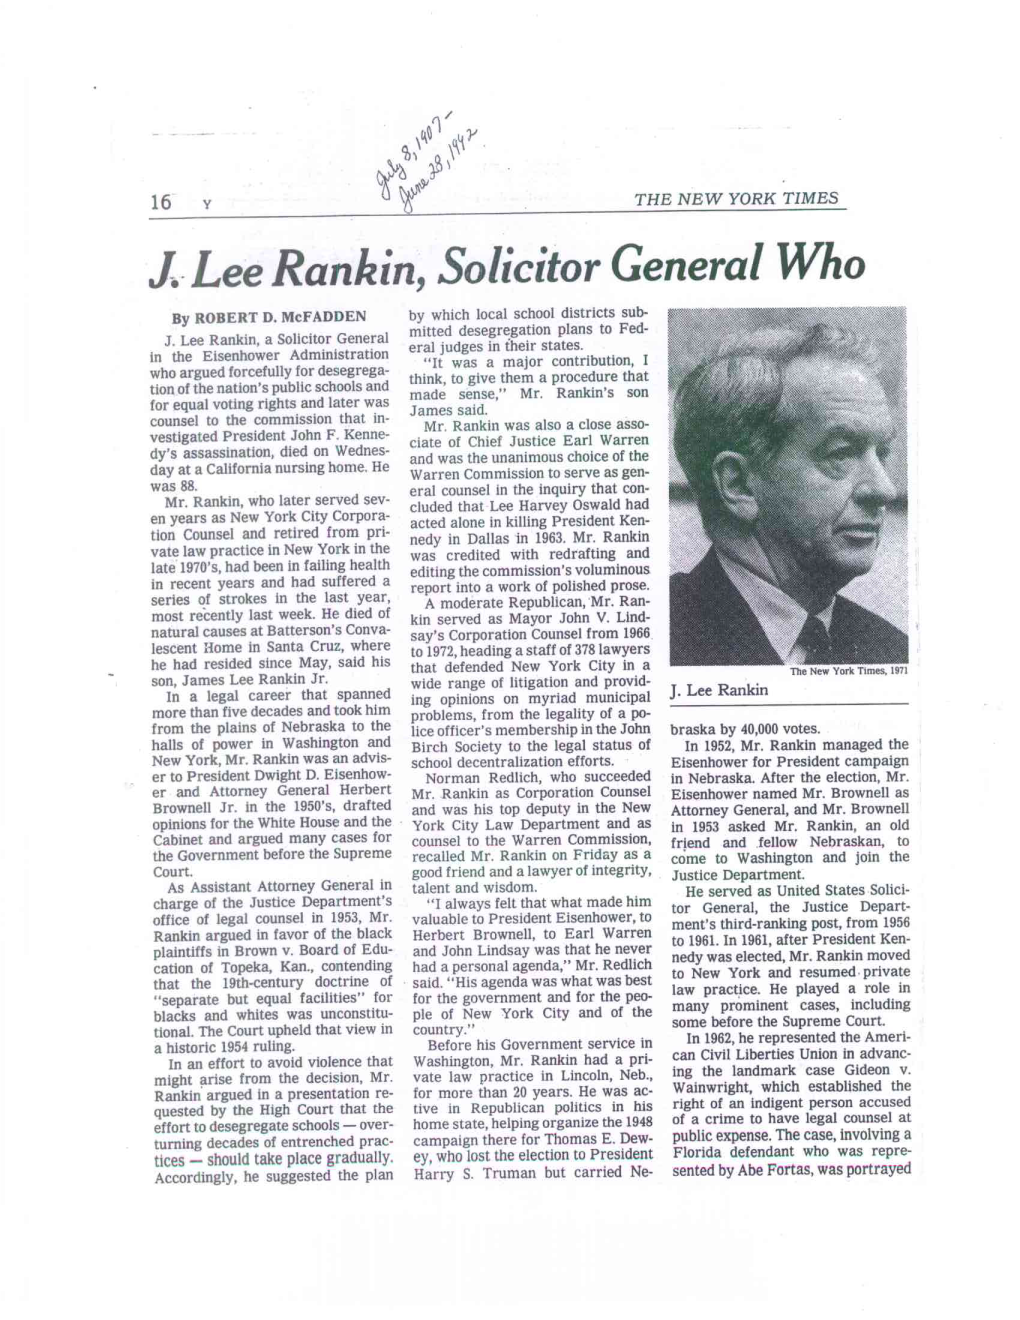 J. Lee Rankin, Solicitor General Who by ROBERT D